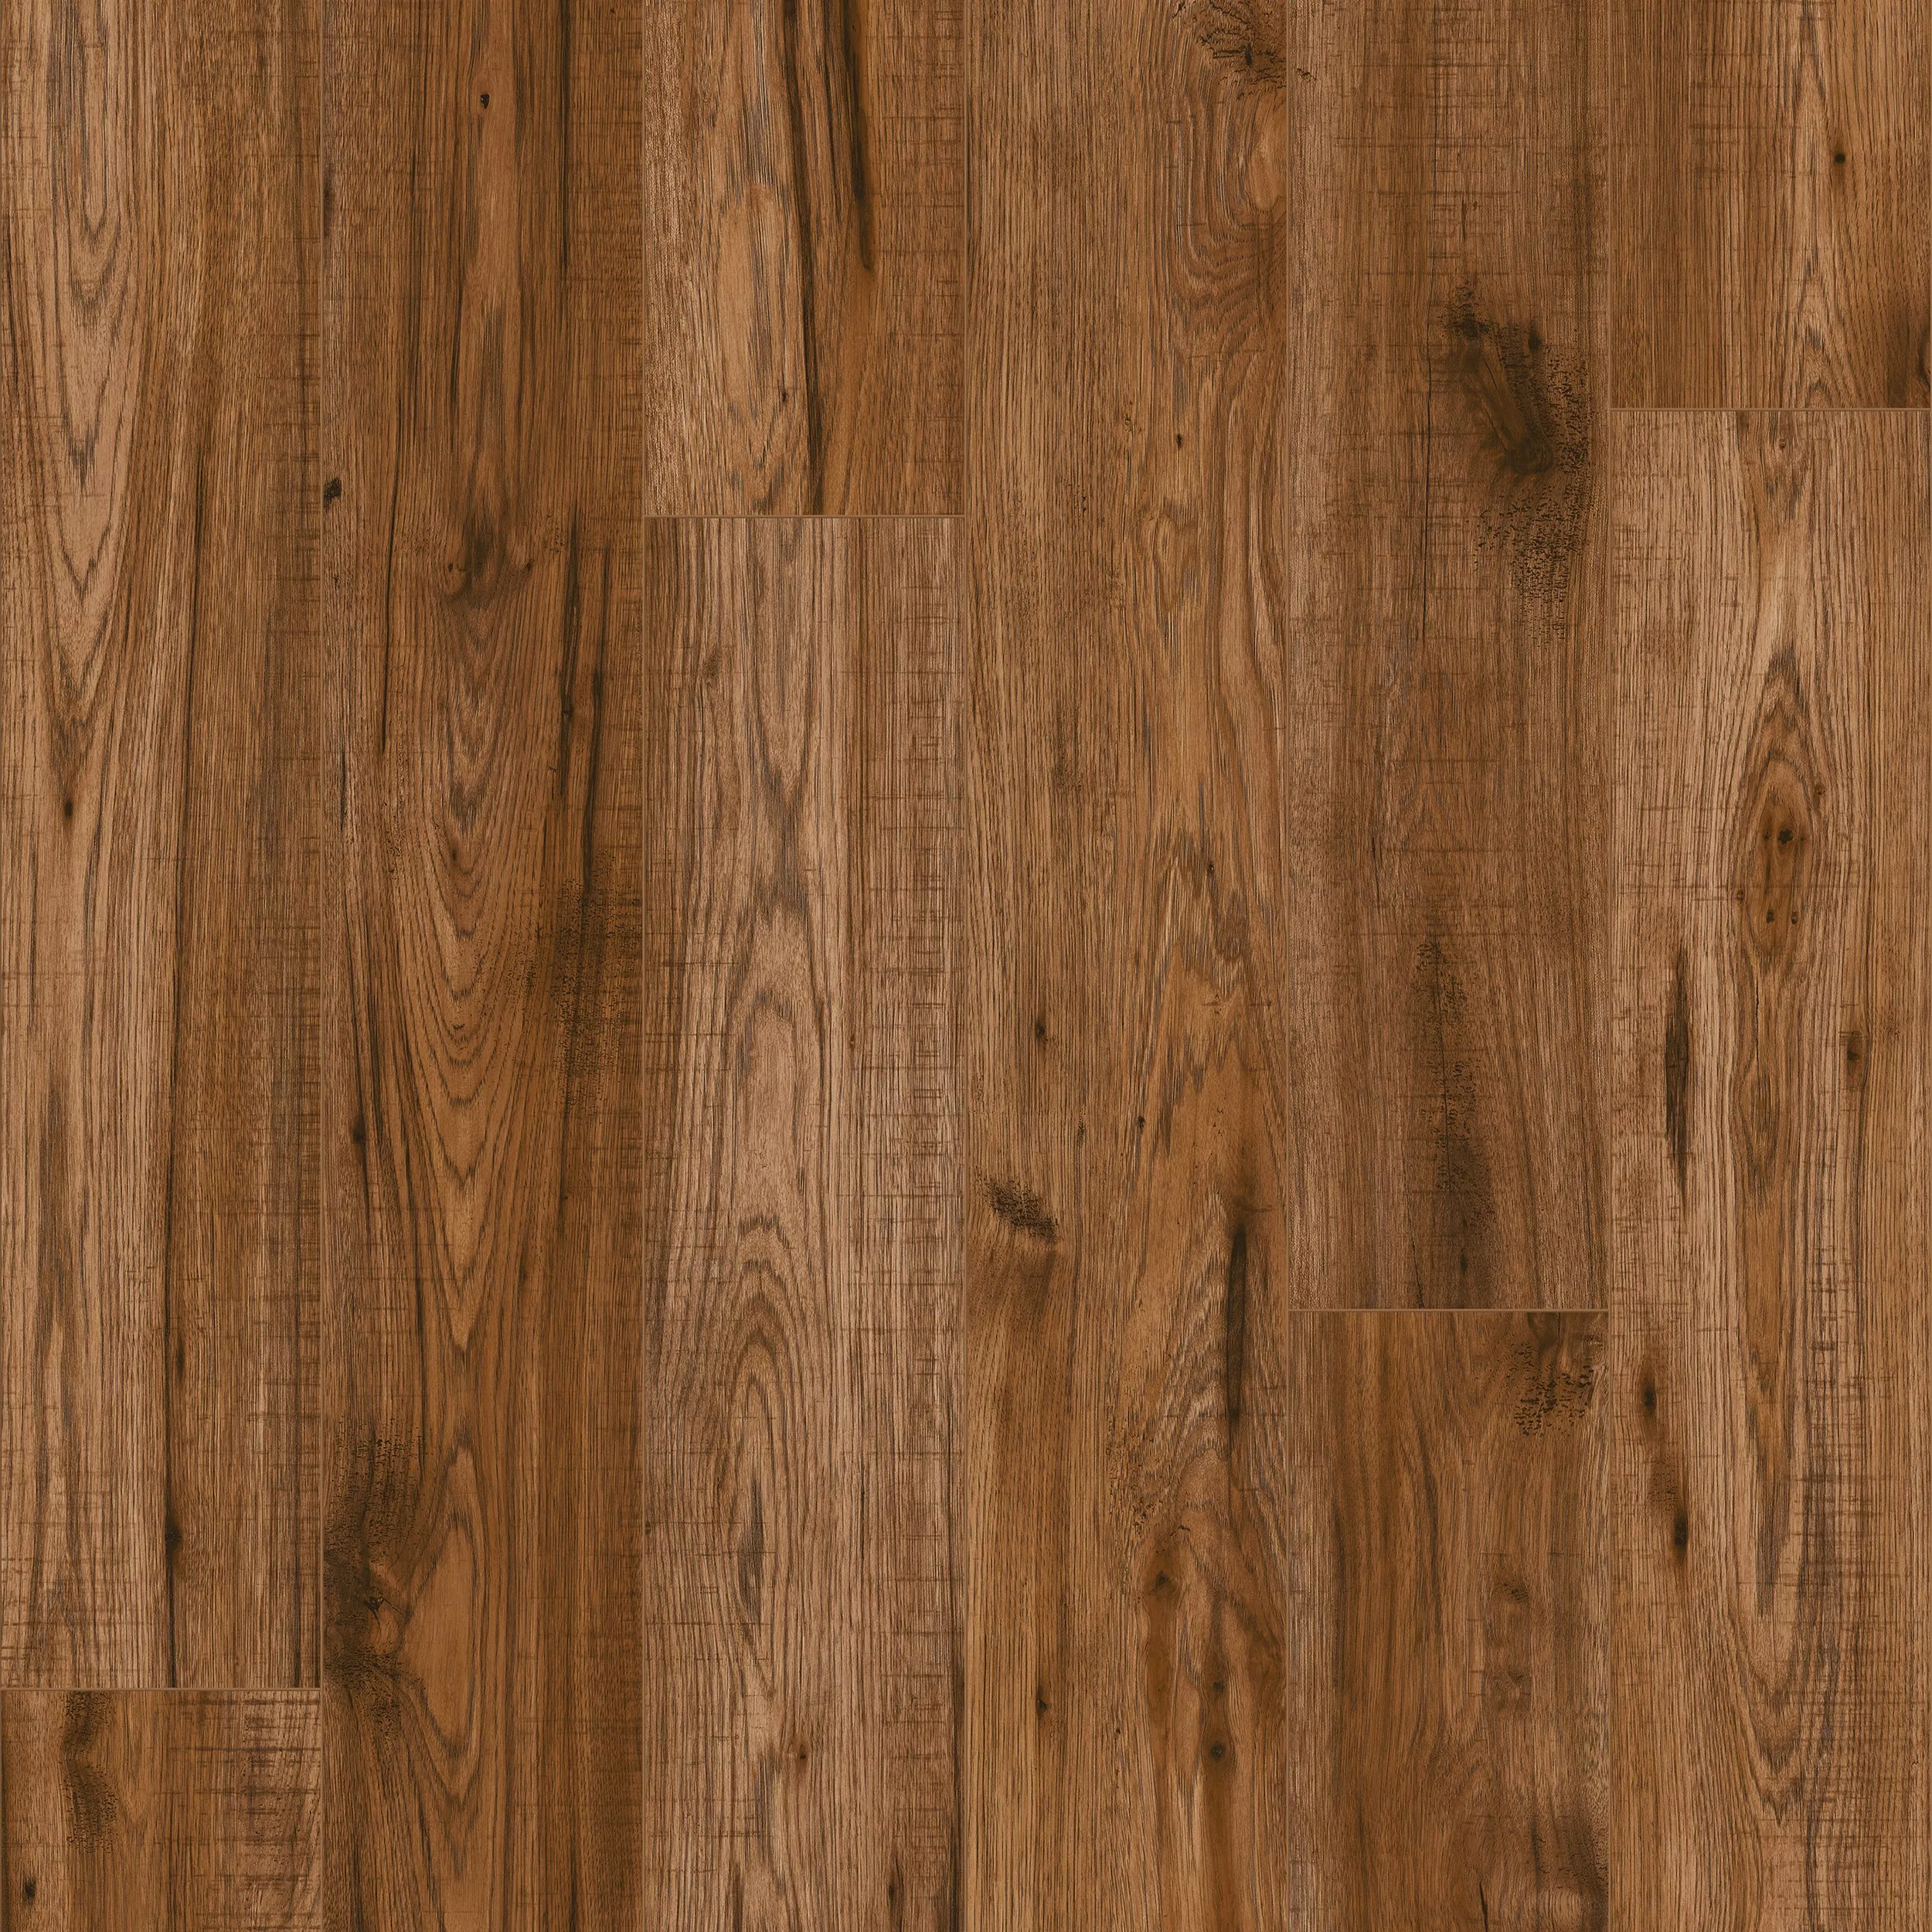 Reclaimed Hickory Water-Resistant Laminate